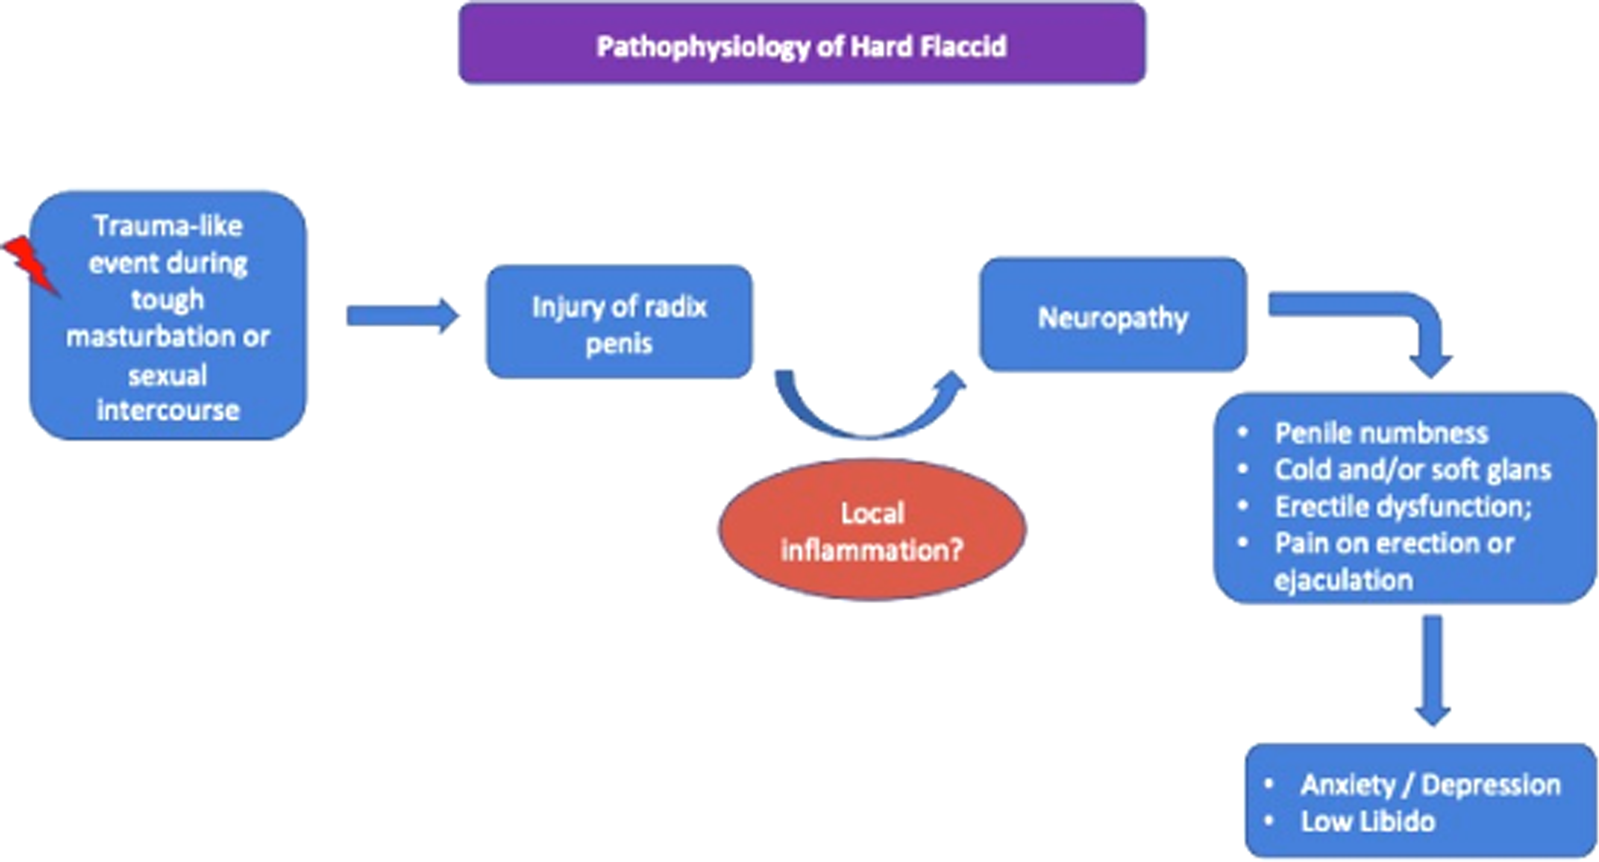 International Journal of Impotence Research - Hard flaccid syndrome: initia...